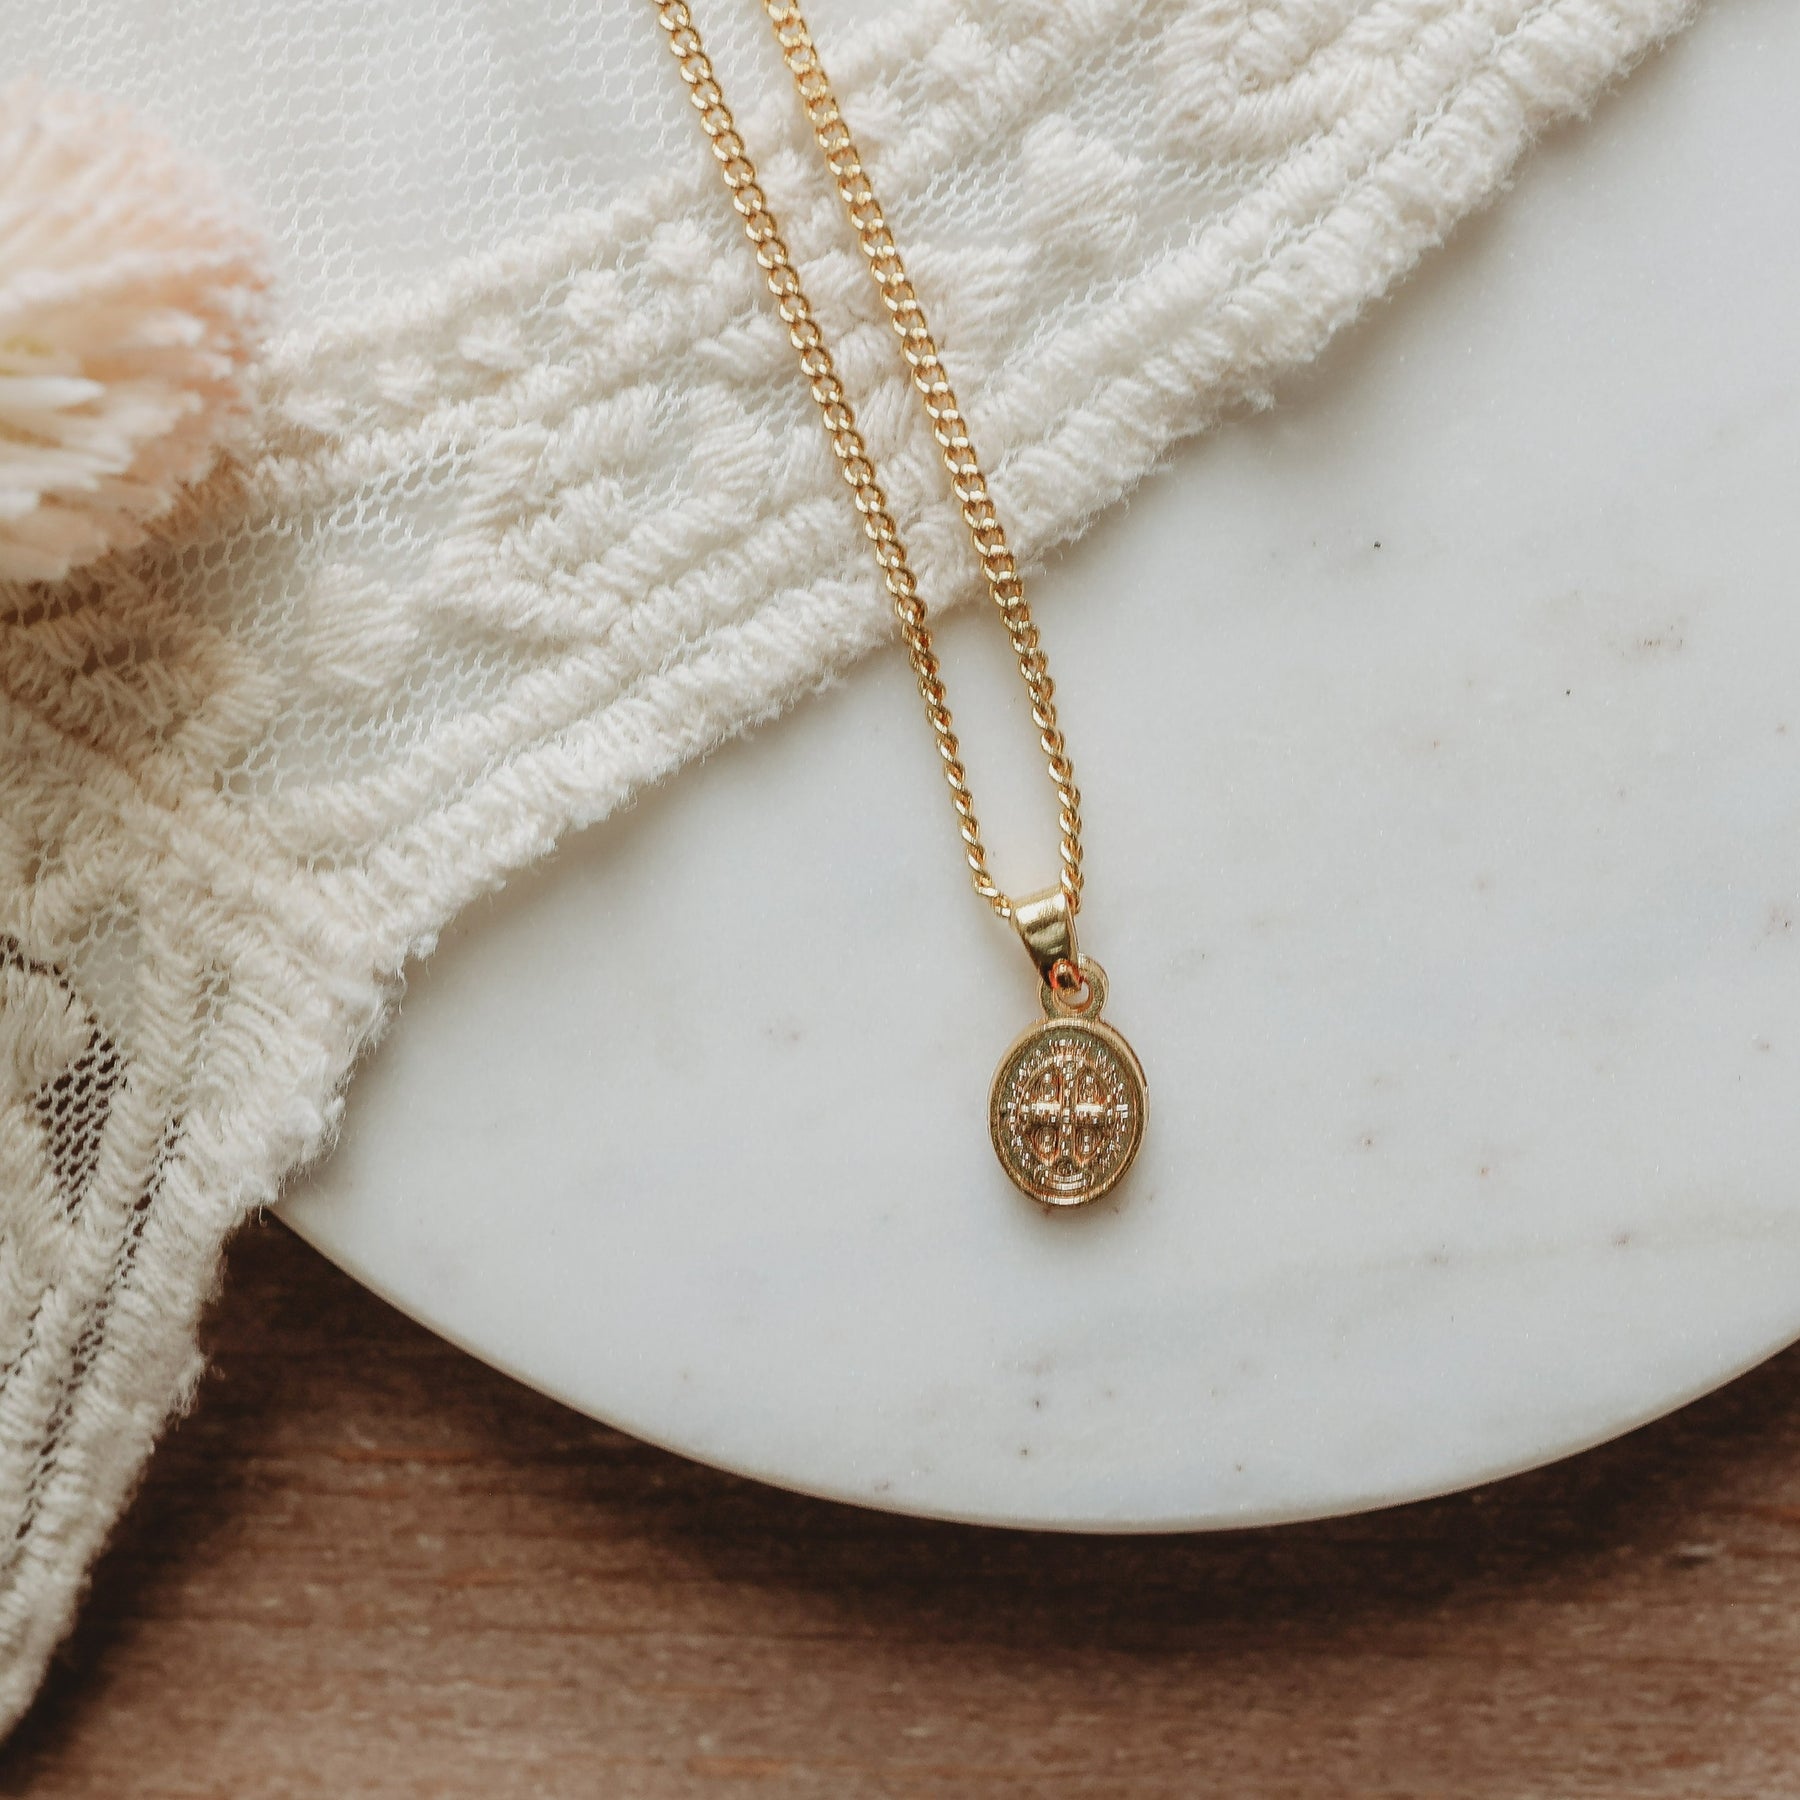 Buy Gold Coin Necklace, St Benedict, Medallion Necklace, Coin Necklace,  Protection Necklace, Religious Jewelry, Saint Benedict Medal, San Benito  Online in India - Etsy